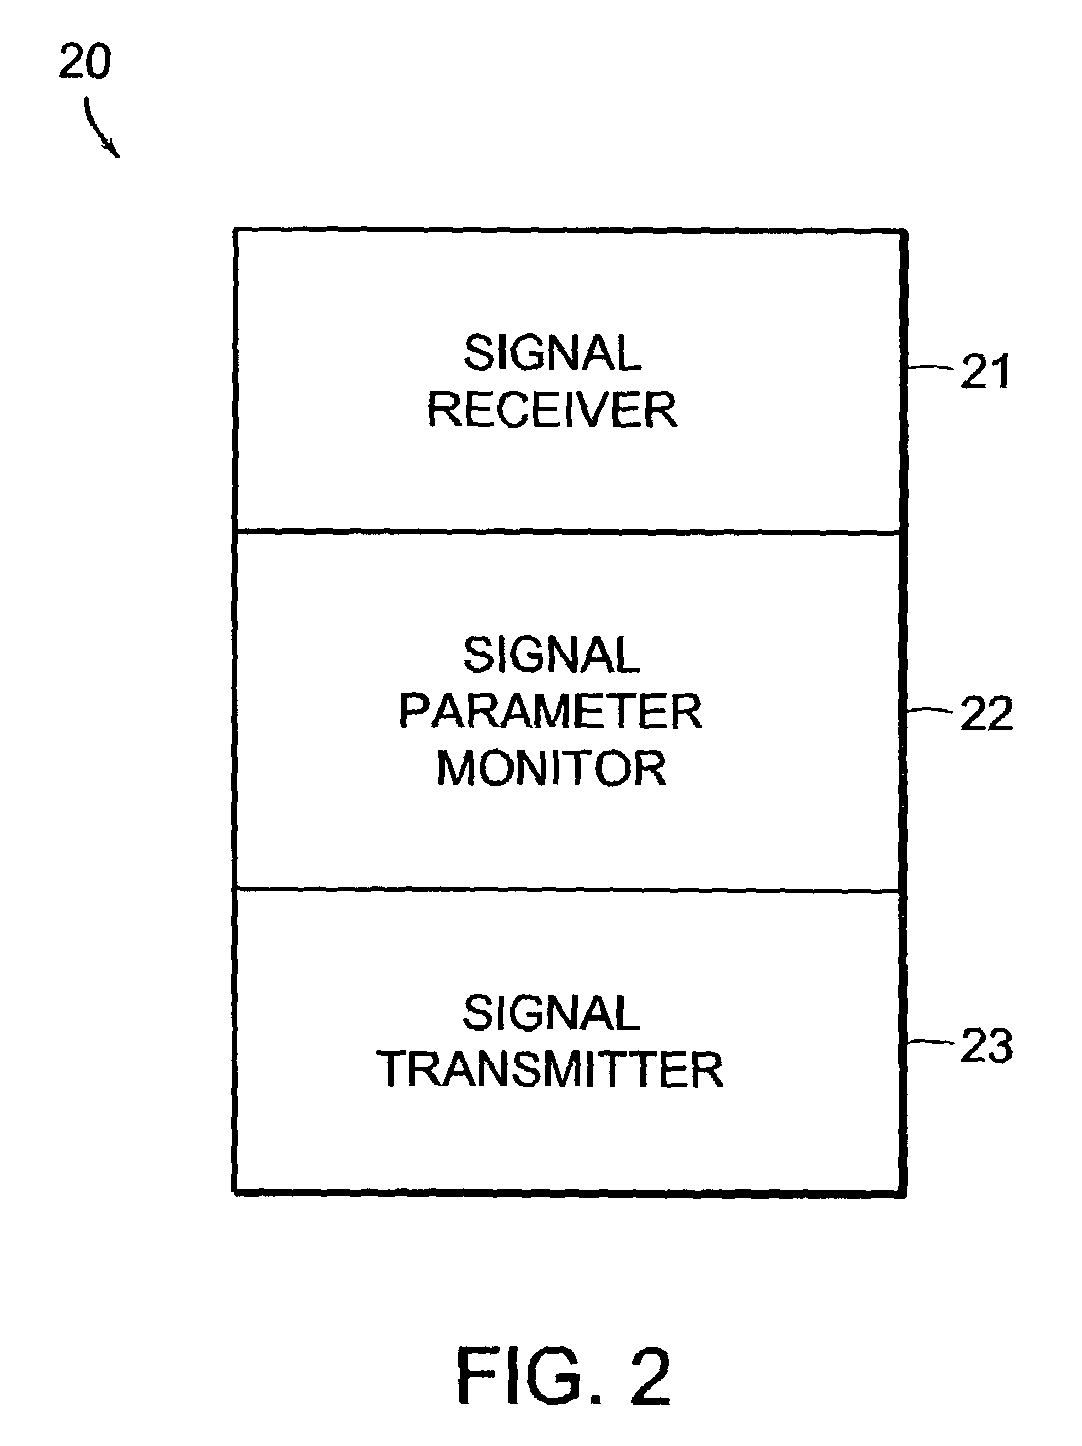 Method for automatic signal routing in ad hoc networks